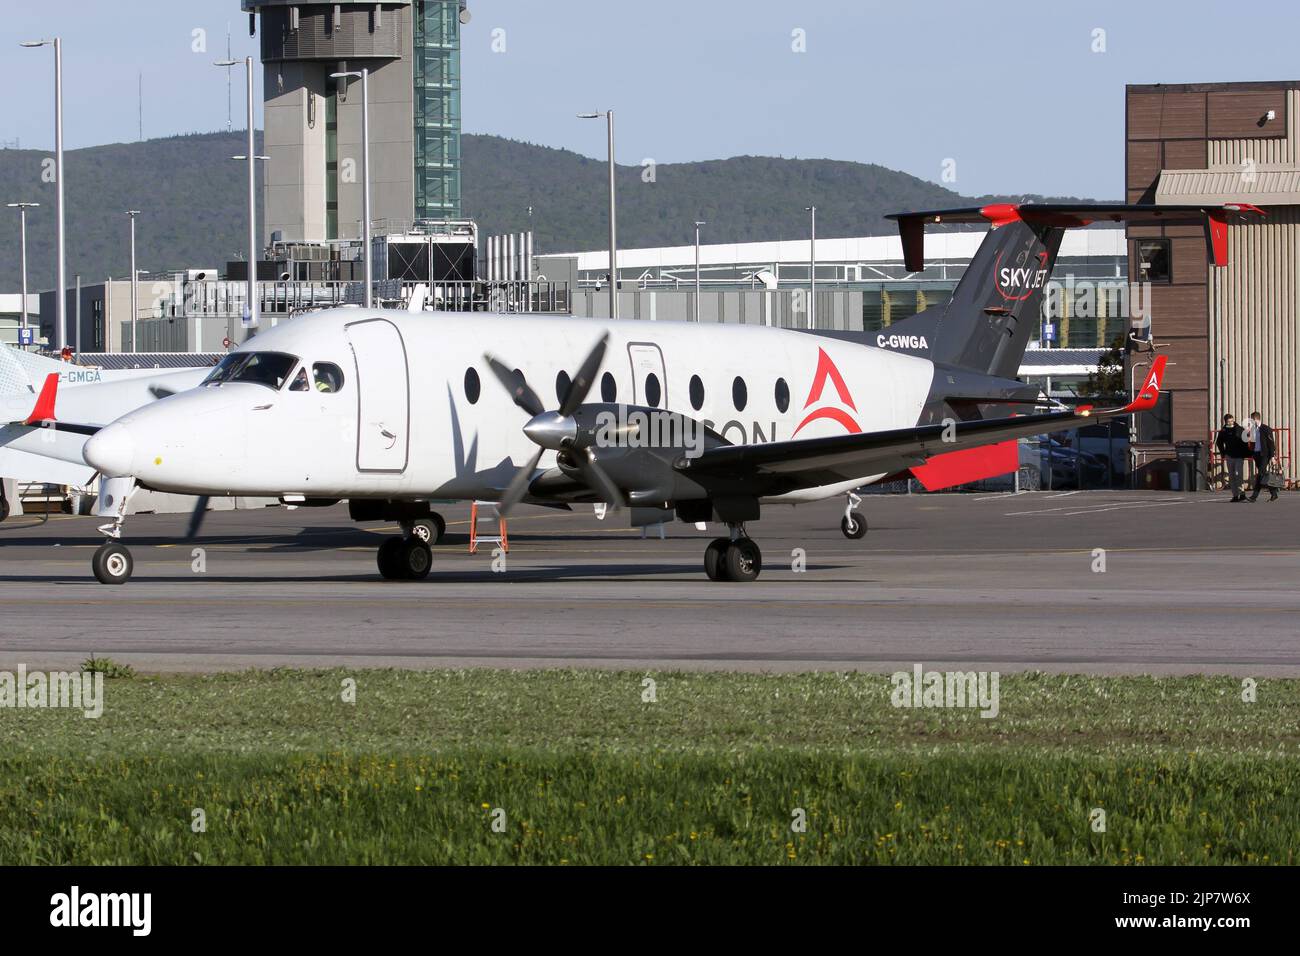 May 24, 2022, Quebec, Canada: A Skyjet Aviation (Air Liaison) Beechcraft 1900D taxiing at Quebec airport. Air Liaison is a regional airline based in Quebec City, Quebec with its base at Québec City Jean Lesage International Airport. It operates scheduled flights to 16 domestic destinations from Monday to Friday.The Beechcraft 1900 is a 19-passenger, pressurized twin-engine turboprop fixed-wing aircraft that was manufactured by Beechcraft. It was designed and is primarily used, as a regional airliner. It is also used as a freight aircraft and corporate transport. (Credit Image: © Fabrizio Gan Stock Photo